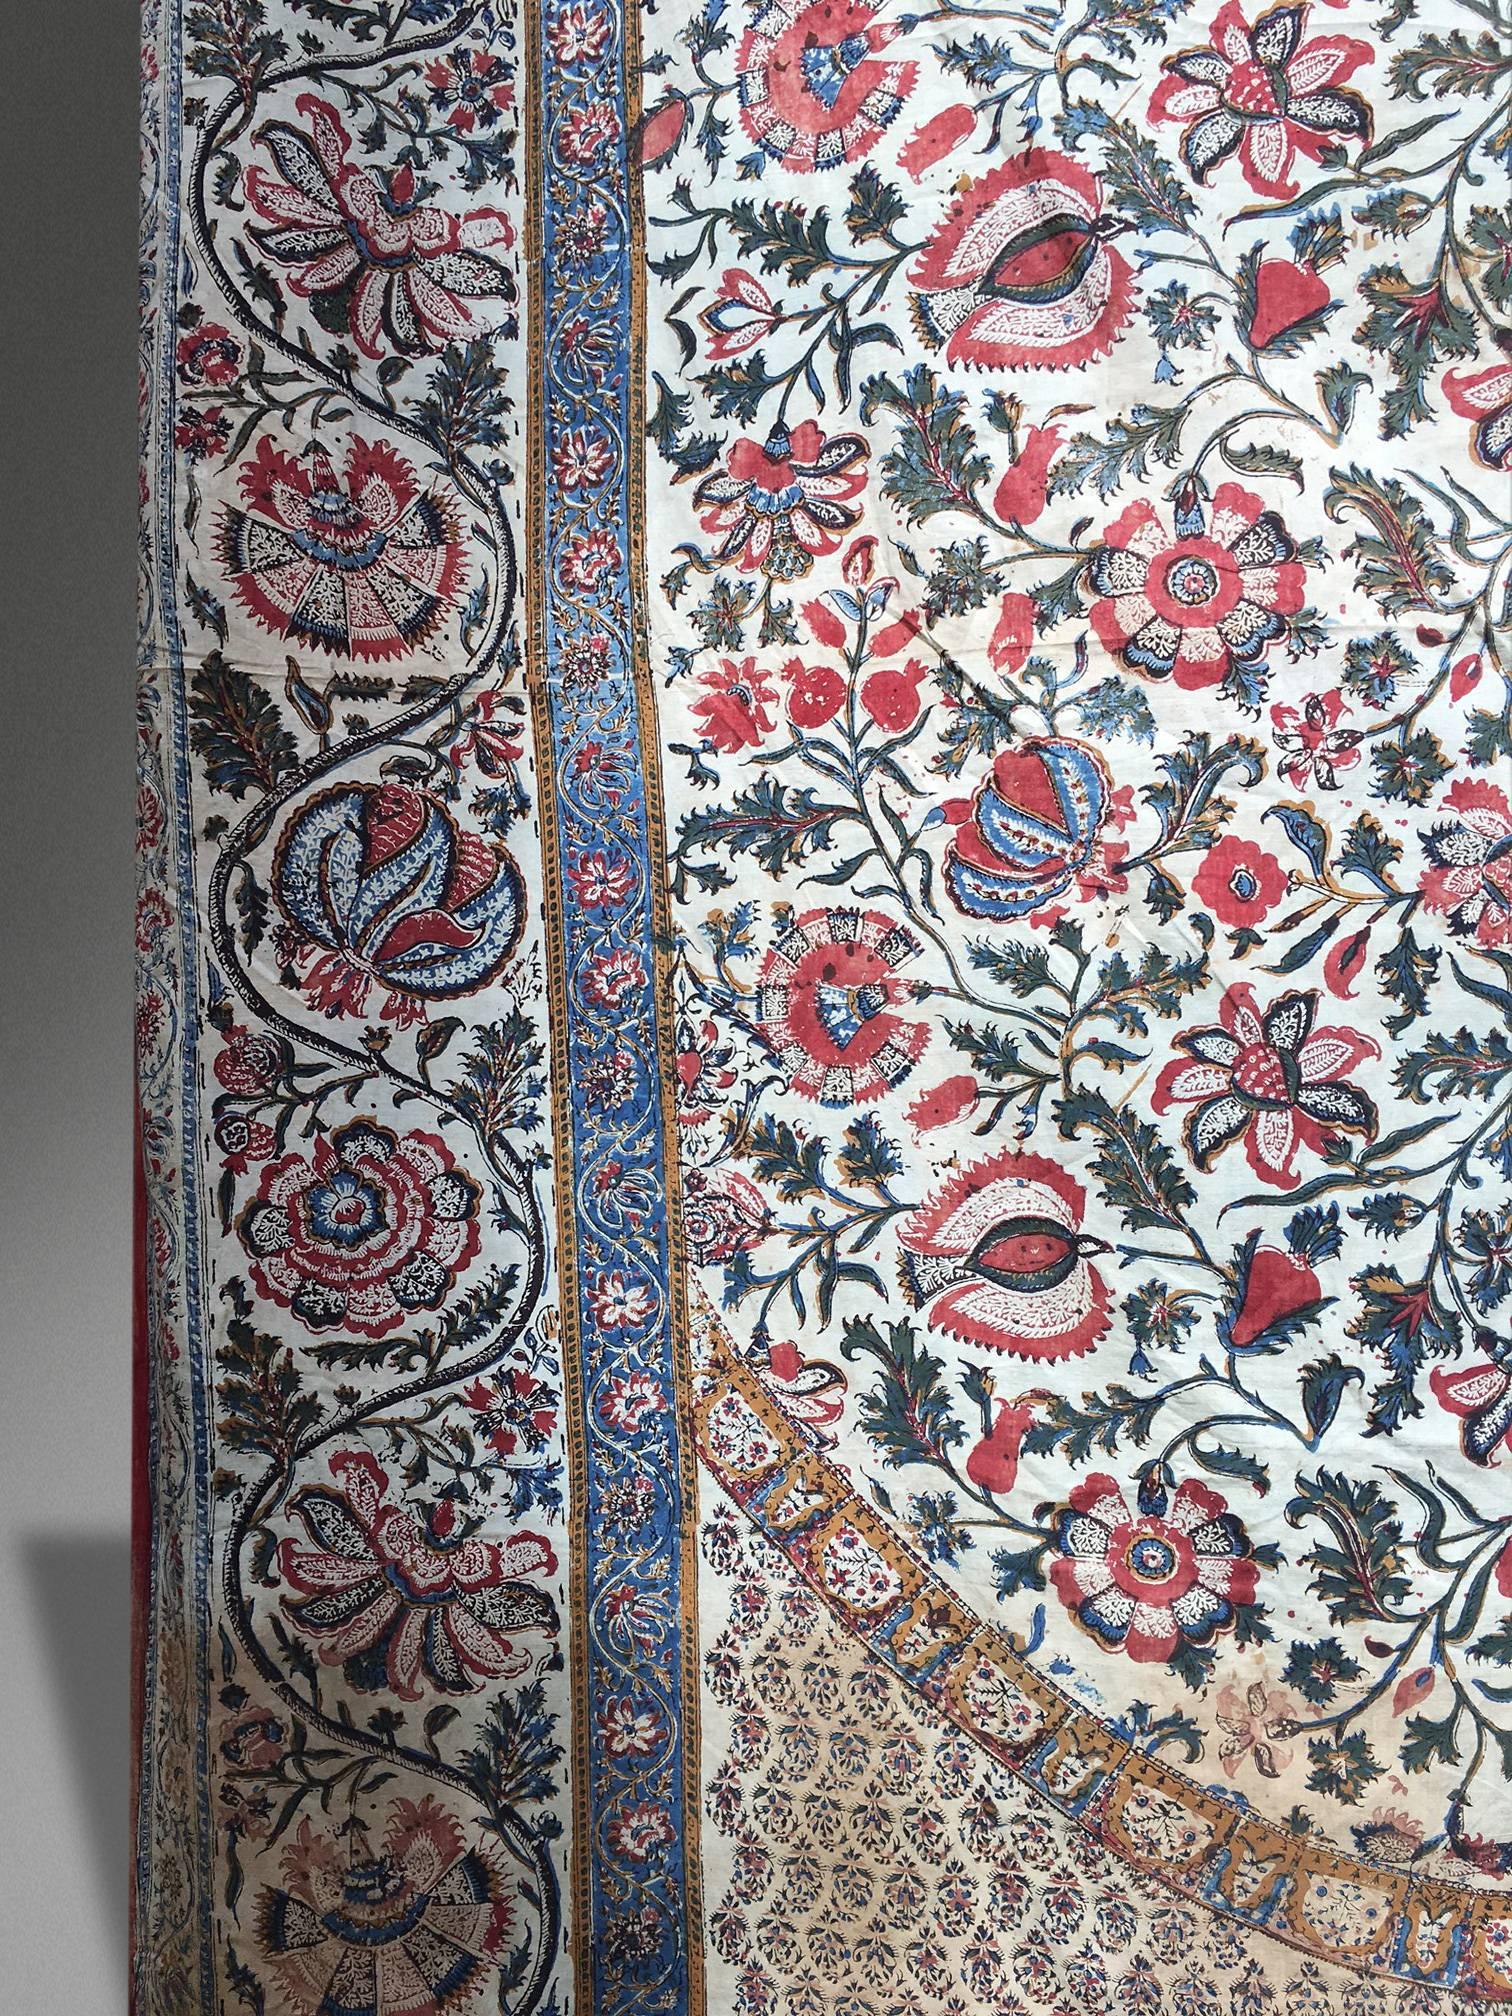 hand-painted palampore, circa late 18th century. 

Northern India, typical floral motif.